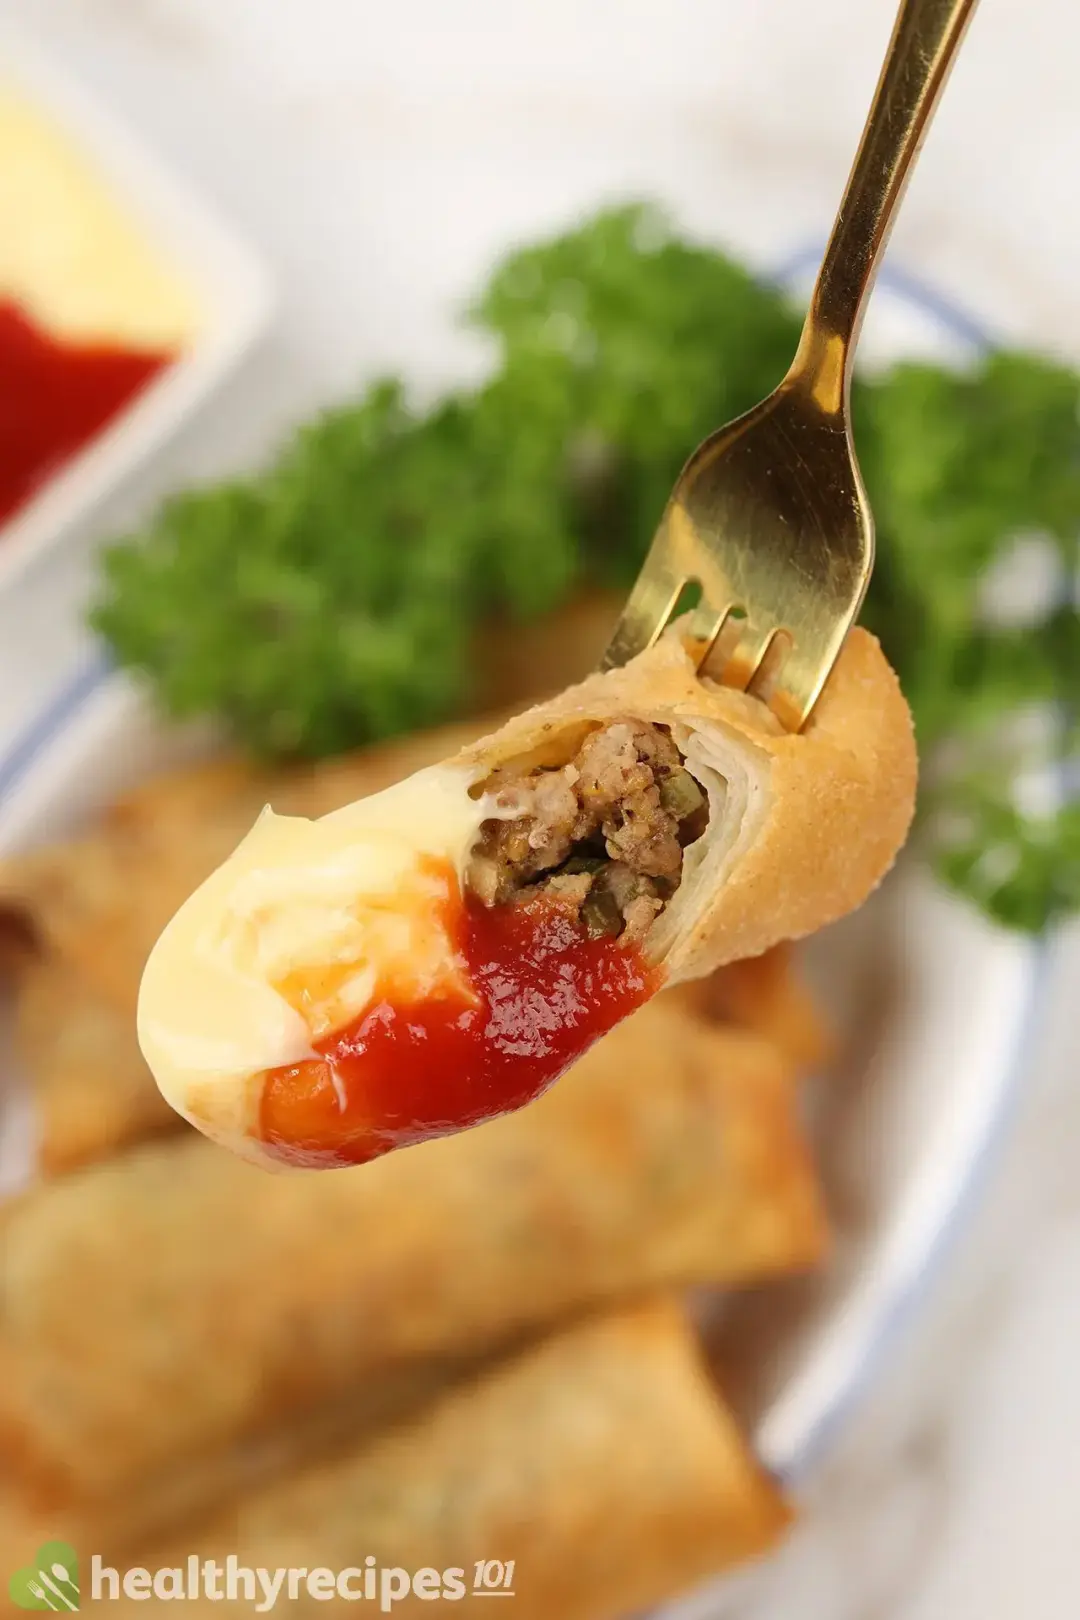 Are Cheeseburger Egg Rolls Healthy